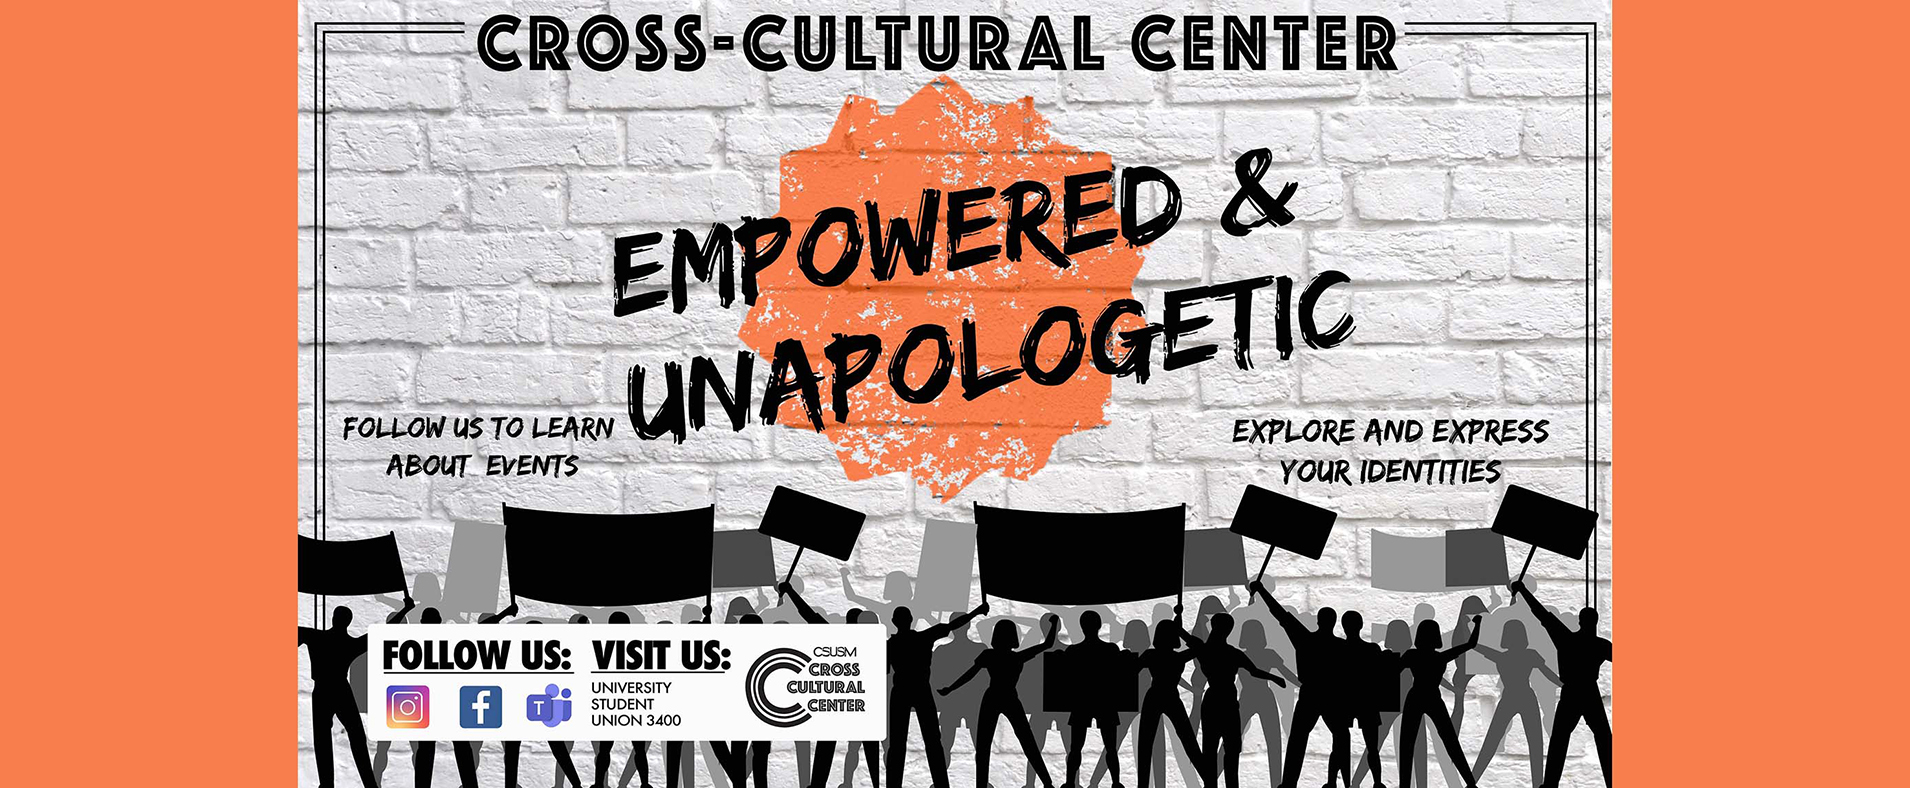 Empowered & Unapologetic - Cross-Cultural Center